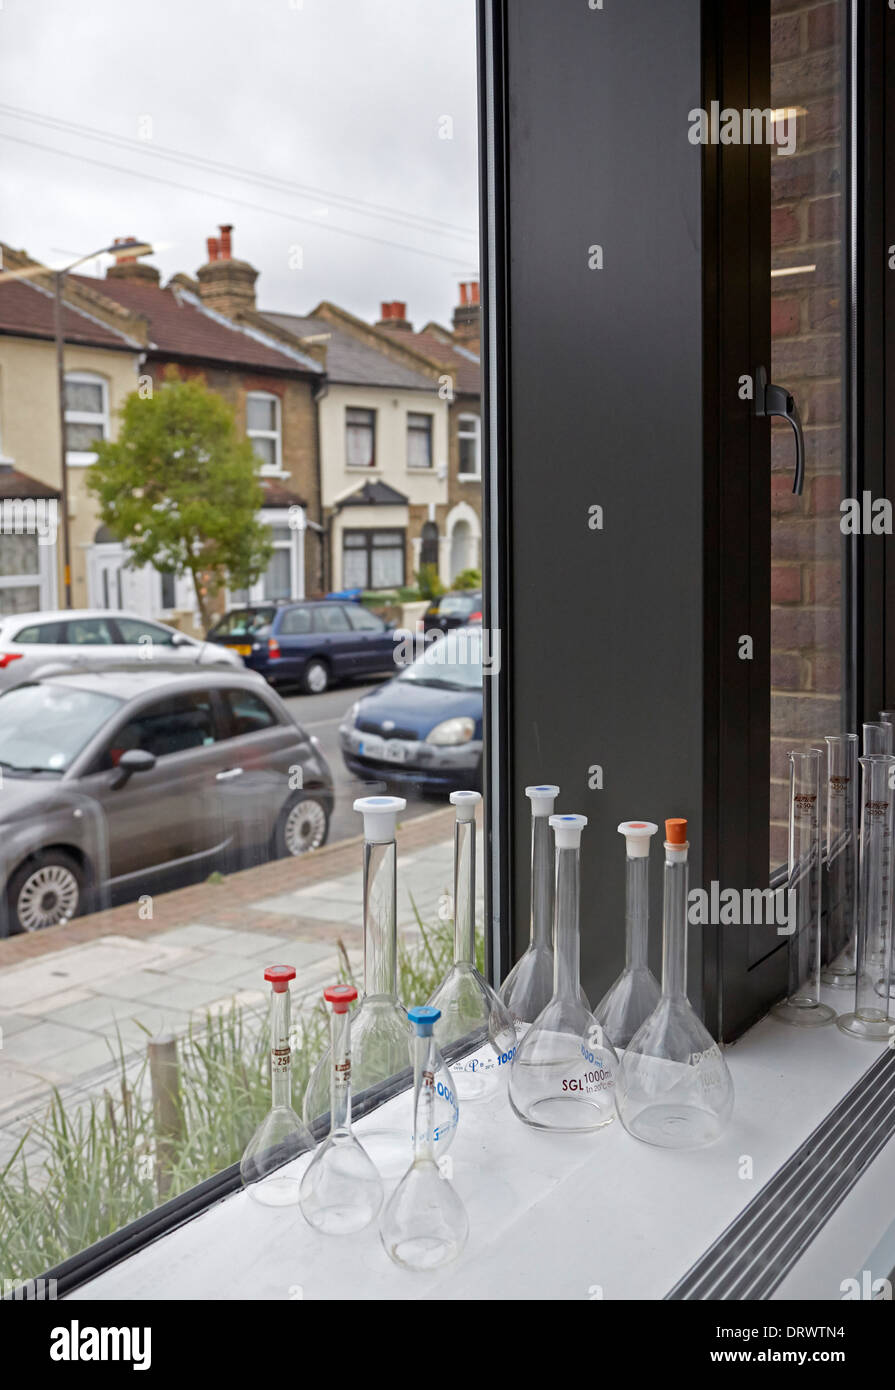 St Thomas the Apostle College, London, United Kingdom. Architect: Allies and Morrison, 2013. Science lab window detail. Stock Photo